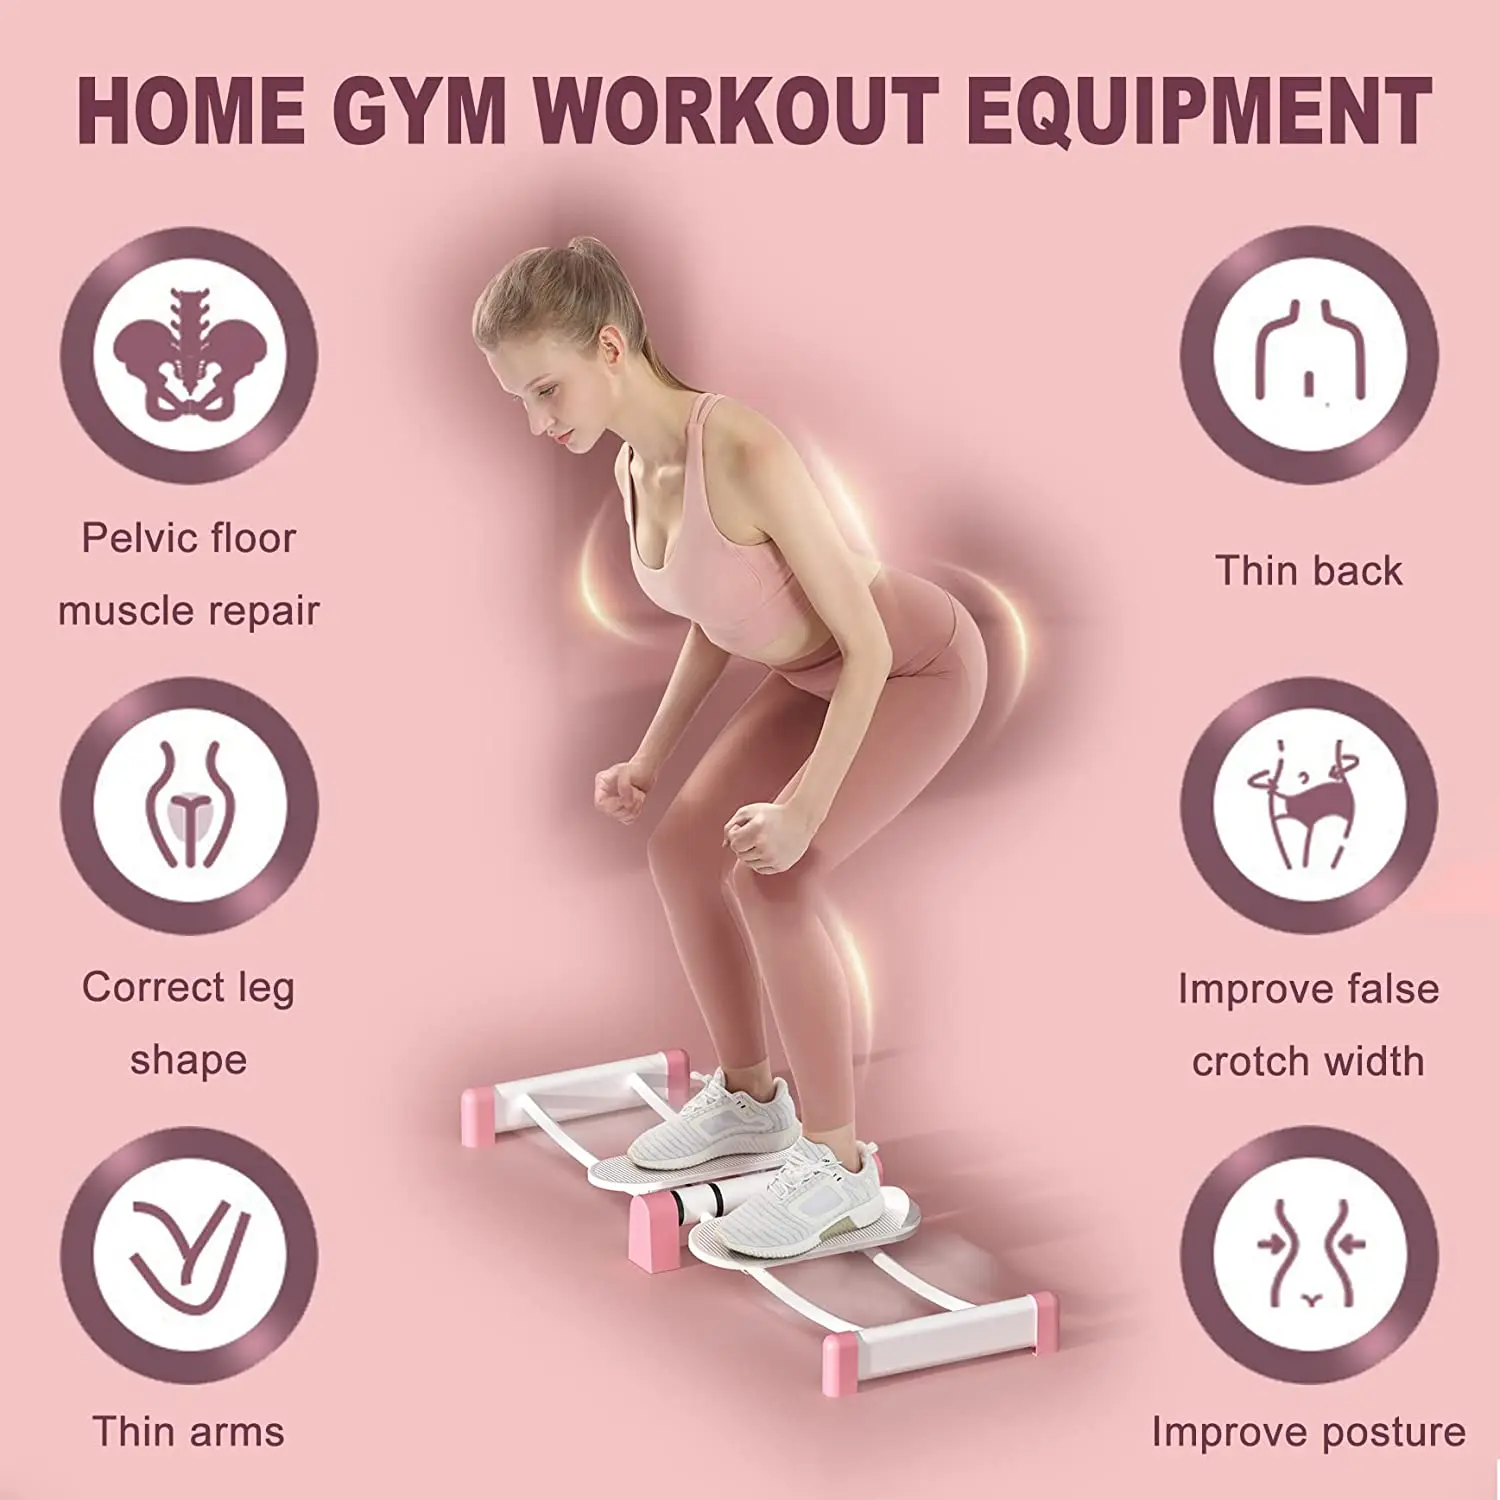 https://ae01.alicdn.com/kf/S6d59d7a1a61743bda31738130d0071f4N/Home-Workouts-Cardio-Trainer-Machine-Whole-Body-leg-Thighs-Buttocks-Shaper-Lower-Body-Muscle-Exercises-Home.jpg